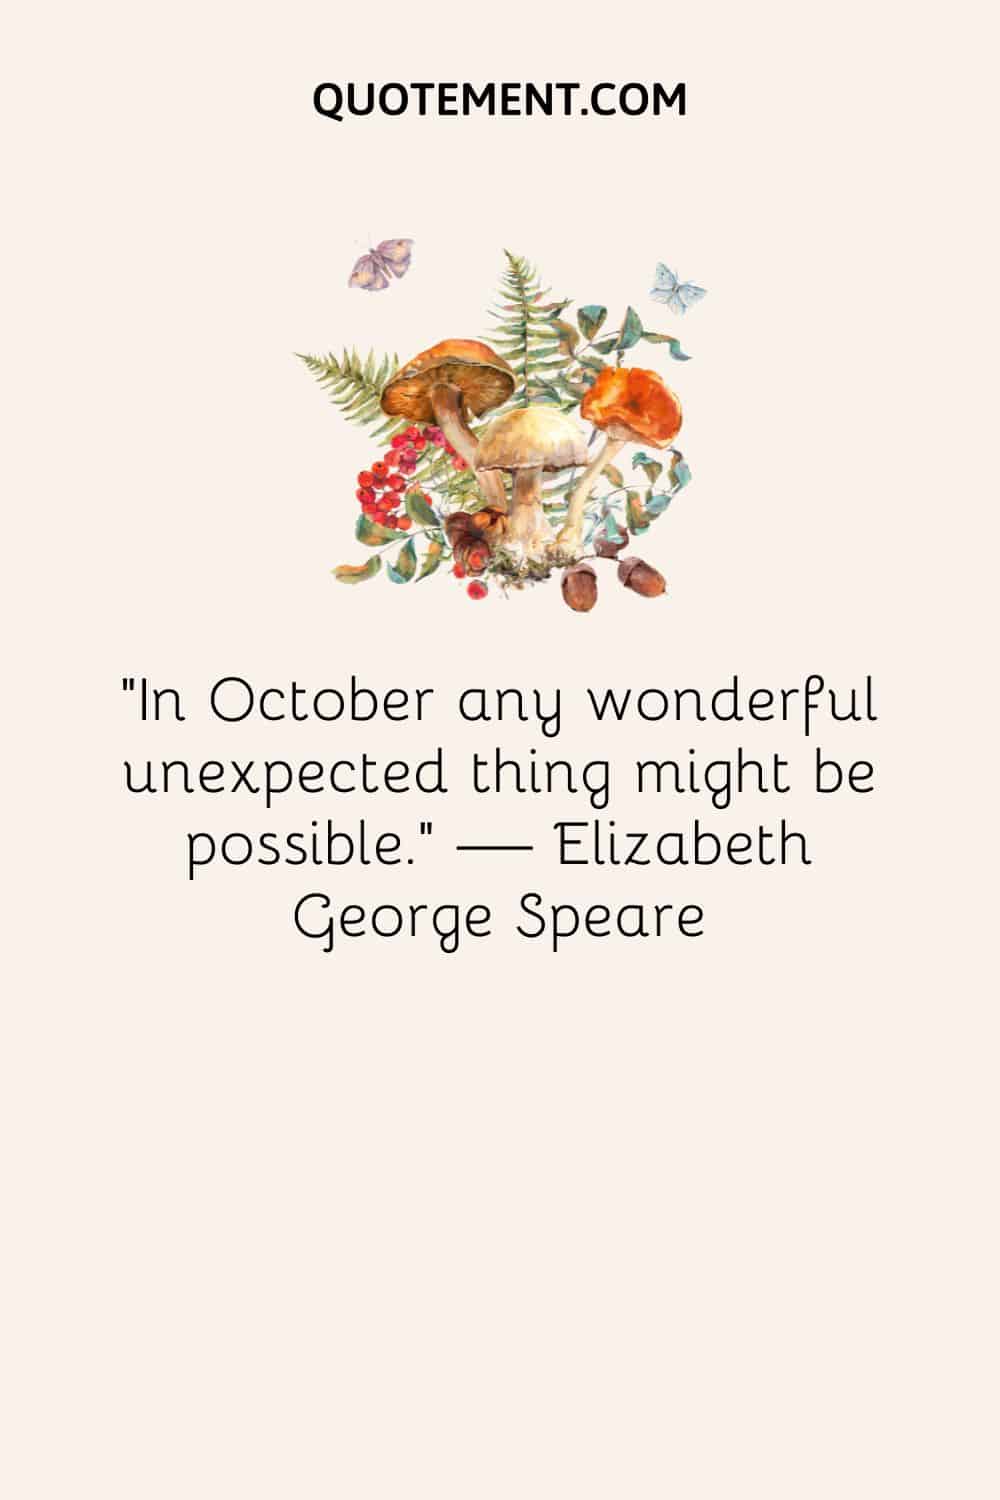 In October any wonderful unexpected thing might be possible